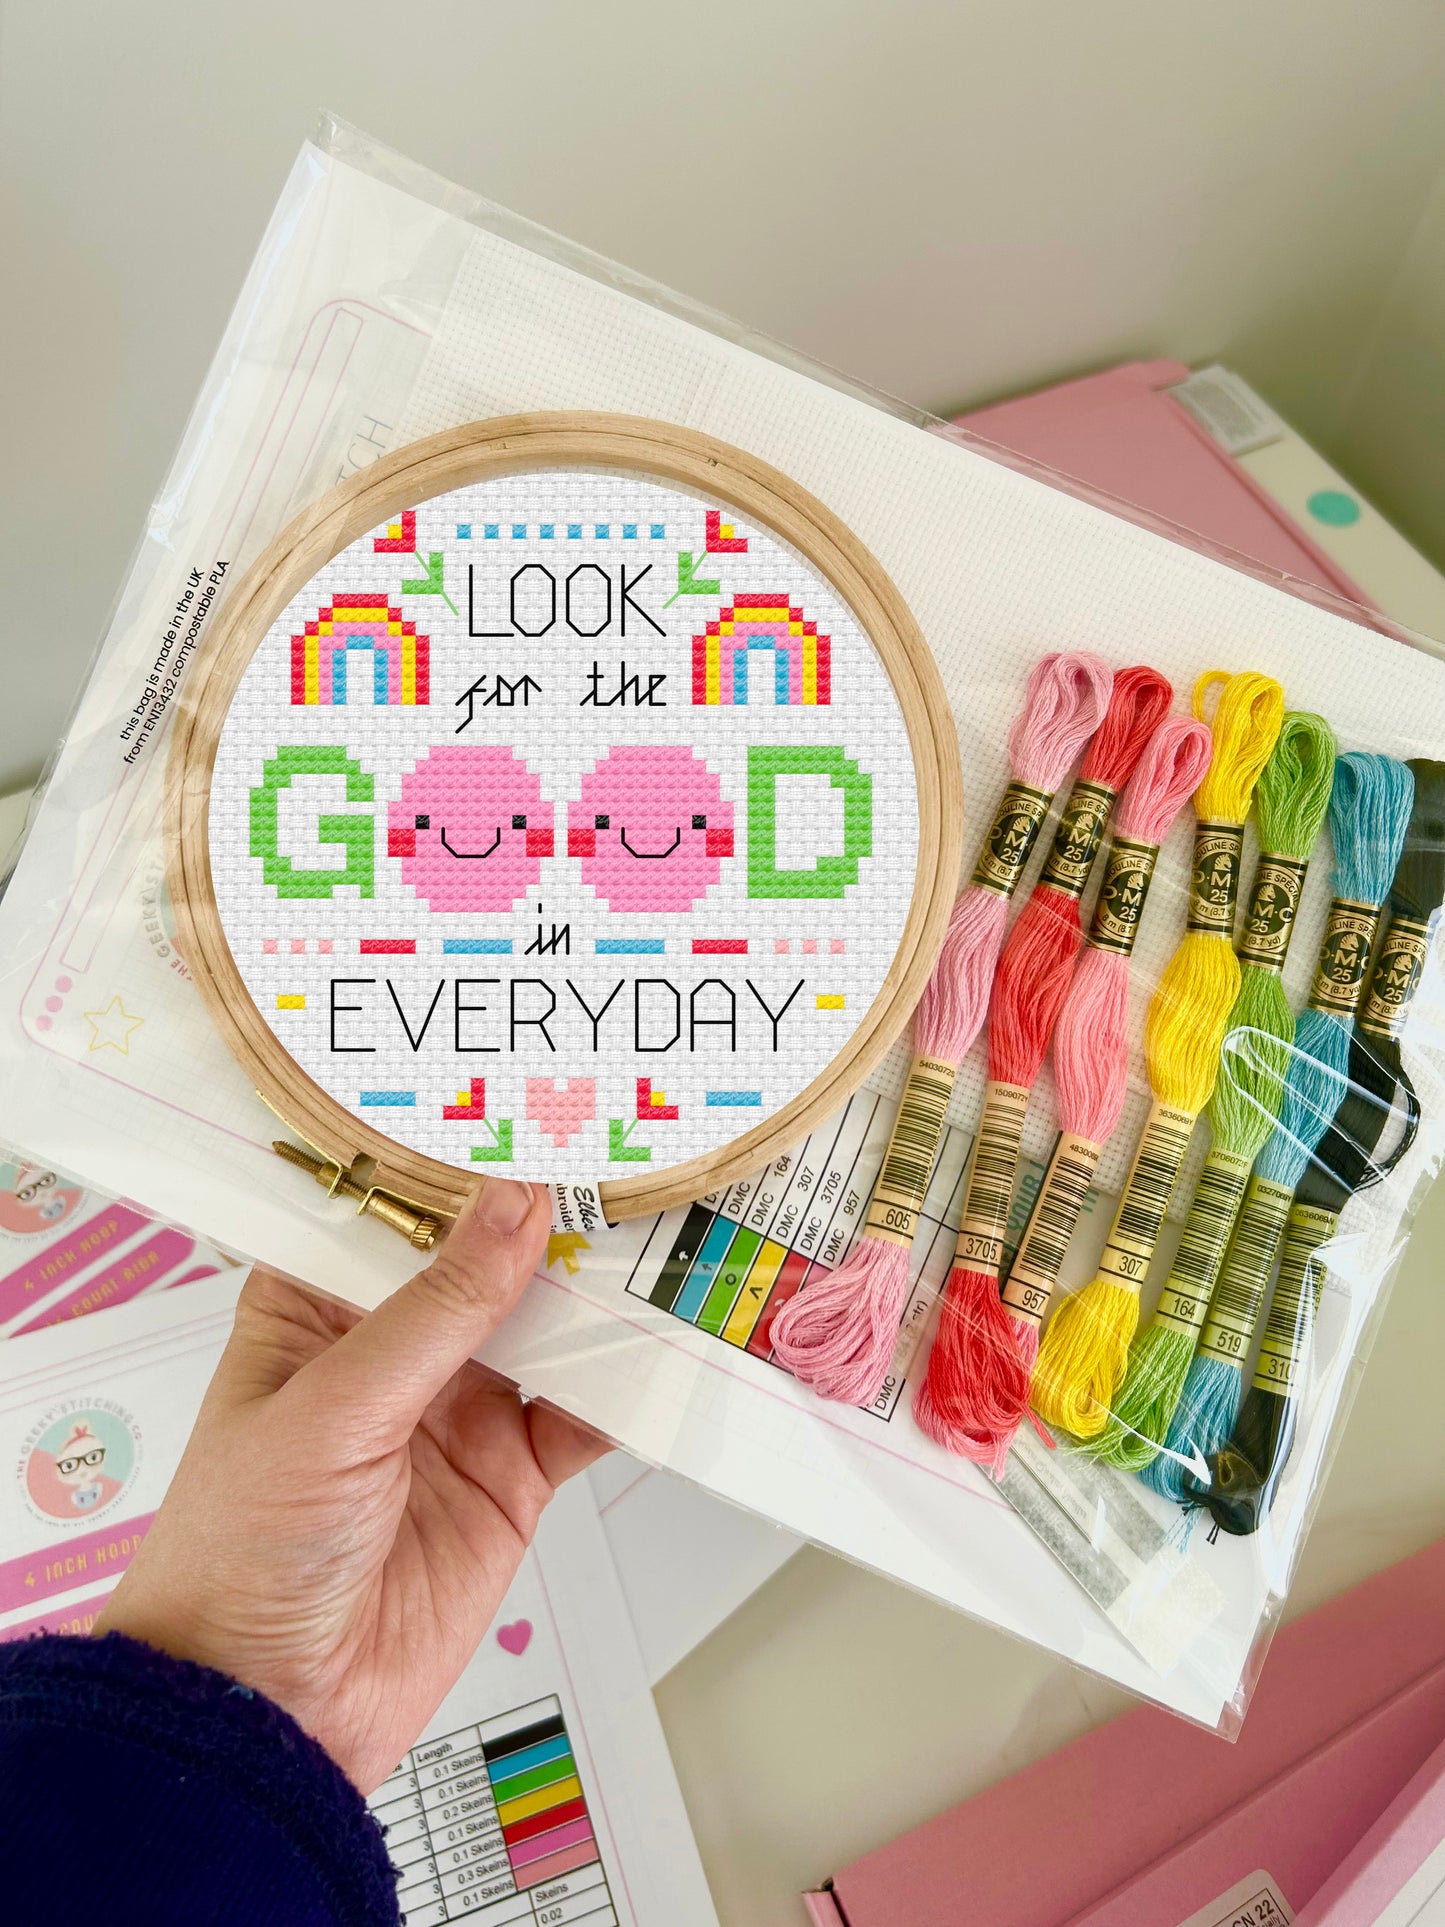 Look for the good in everyday - *Cross Stitch Kit*